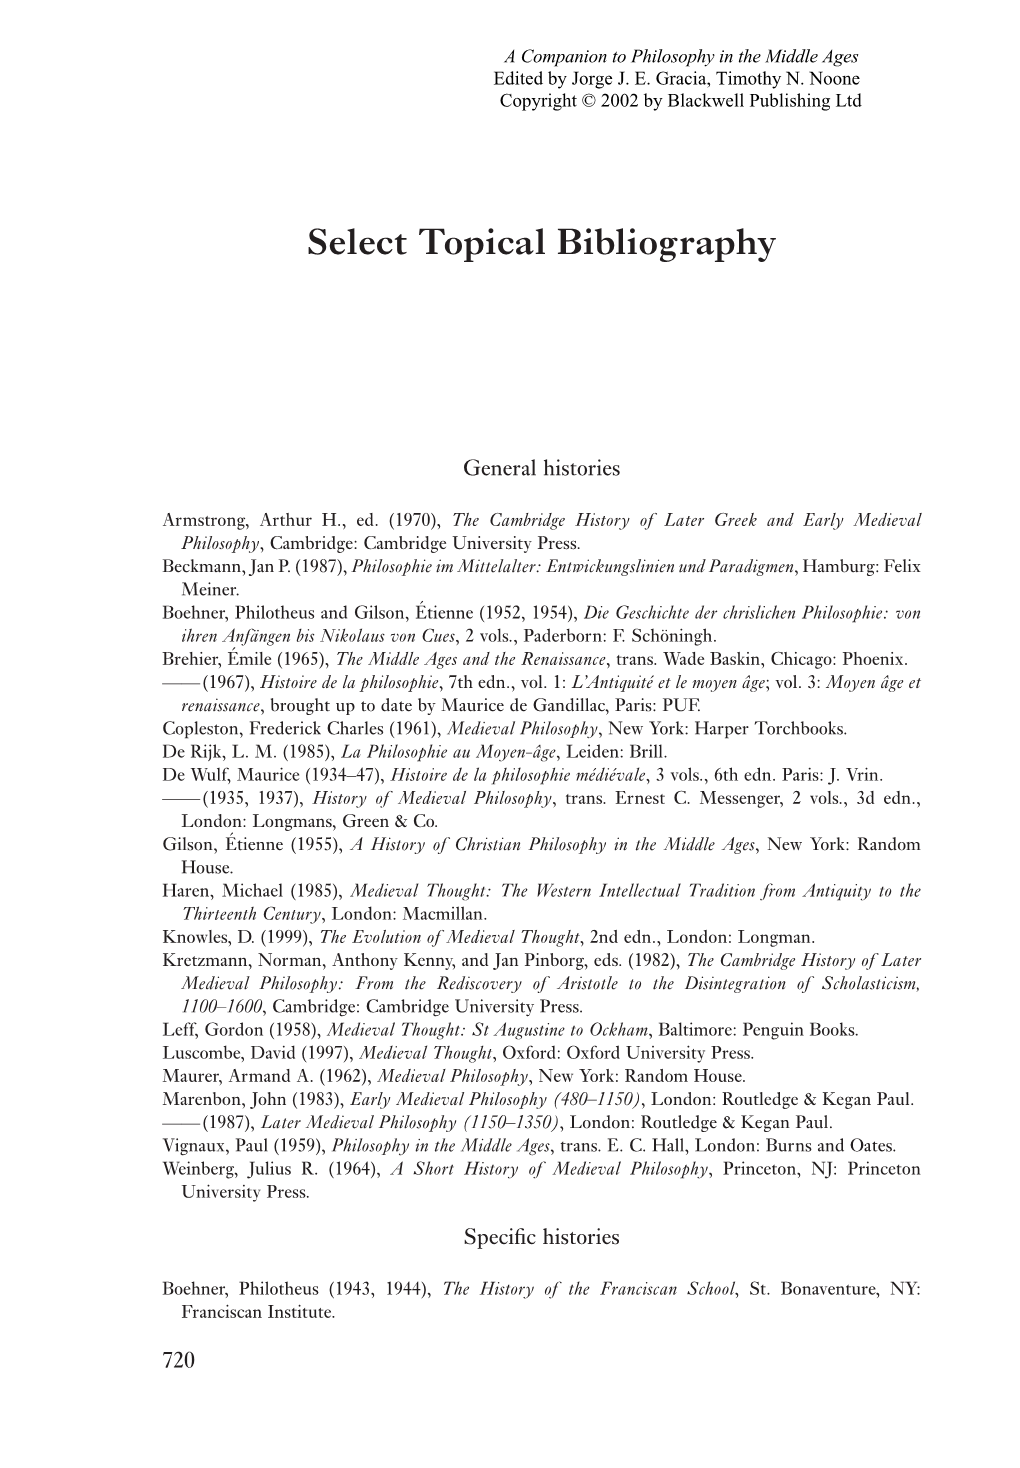 Select Topical Bibliography